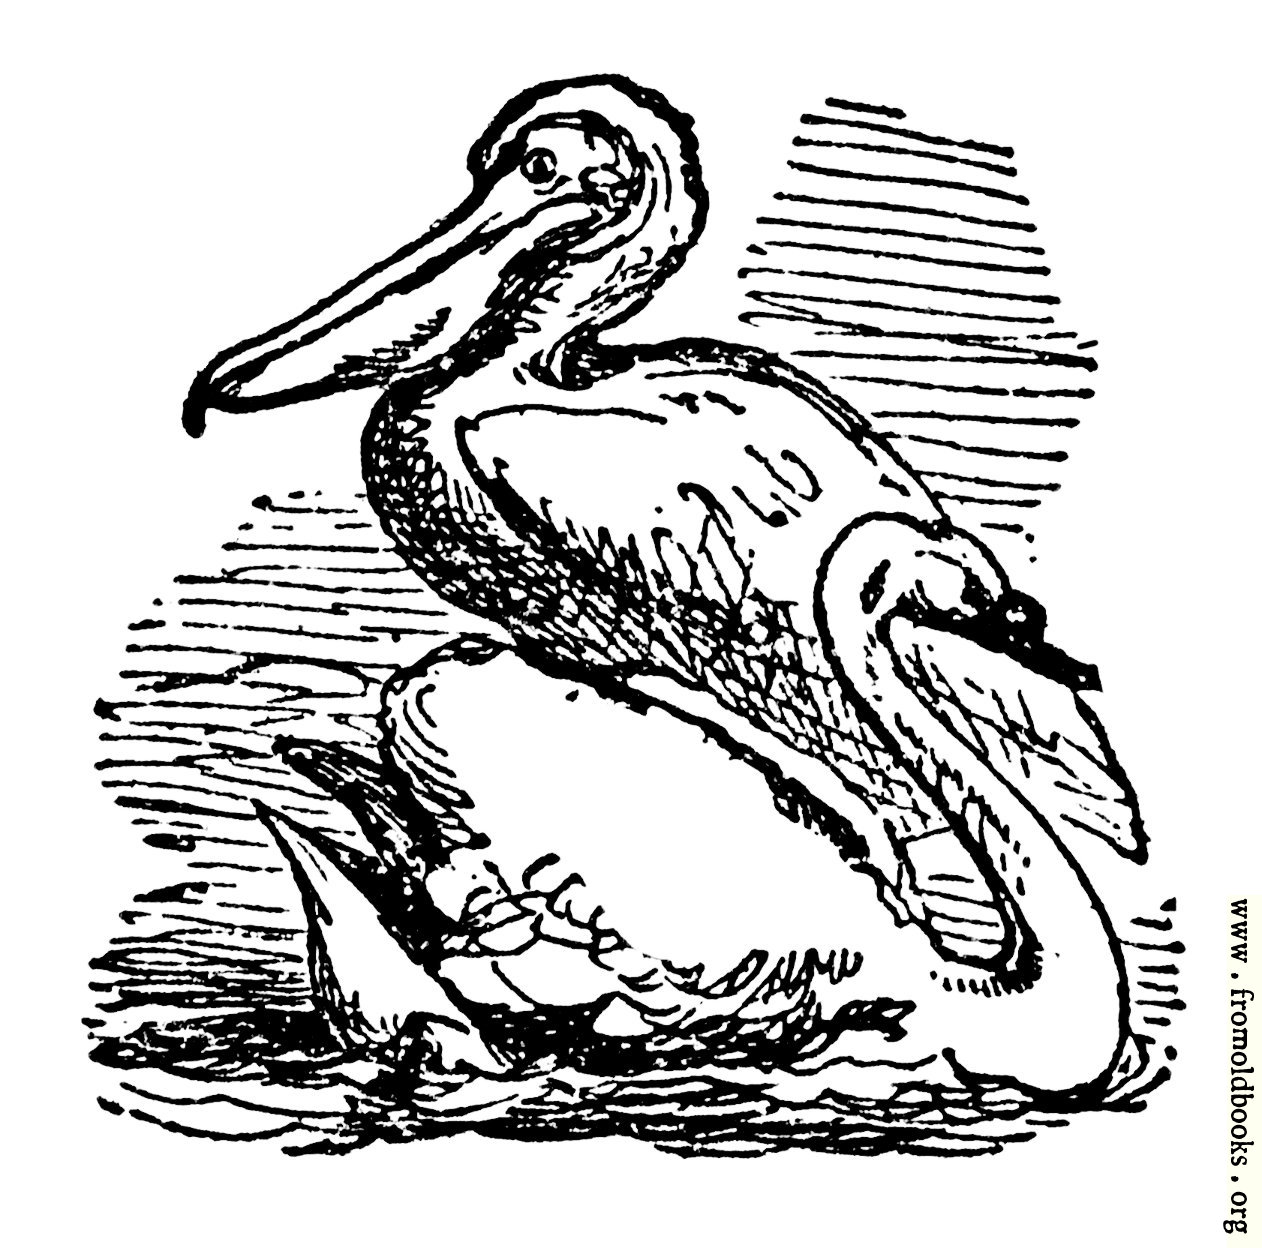 [Picture: The Pelican and the Swan]